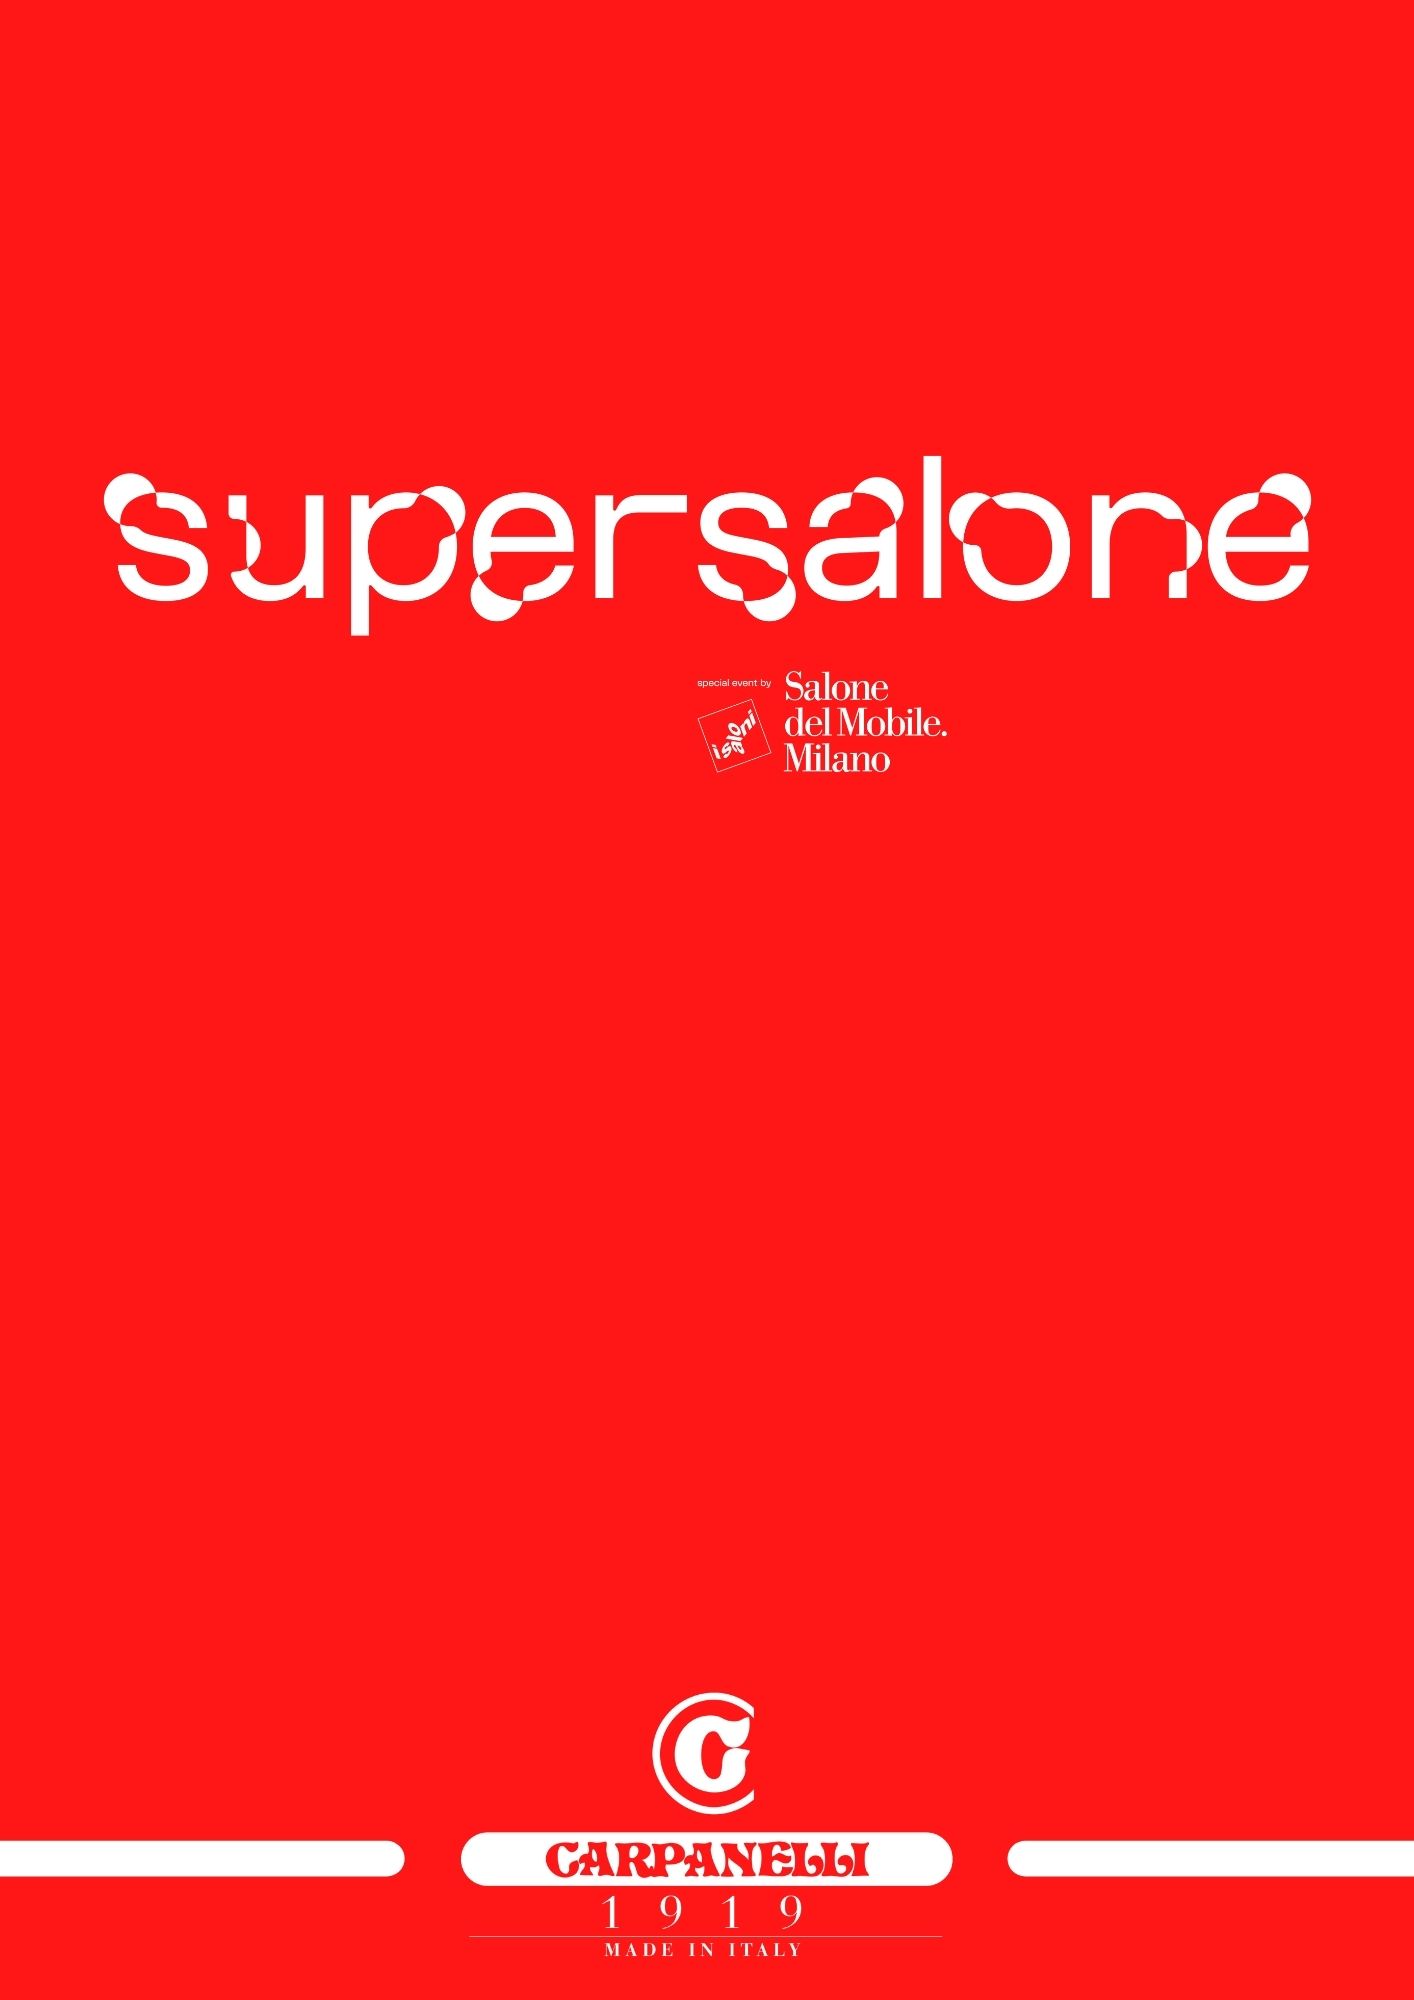 We are pleased to announce that from 5 to 10 September we will be present at the Supersalone! PAV 01 E02, Rho (MI)